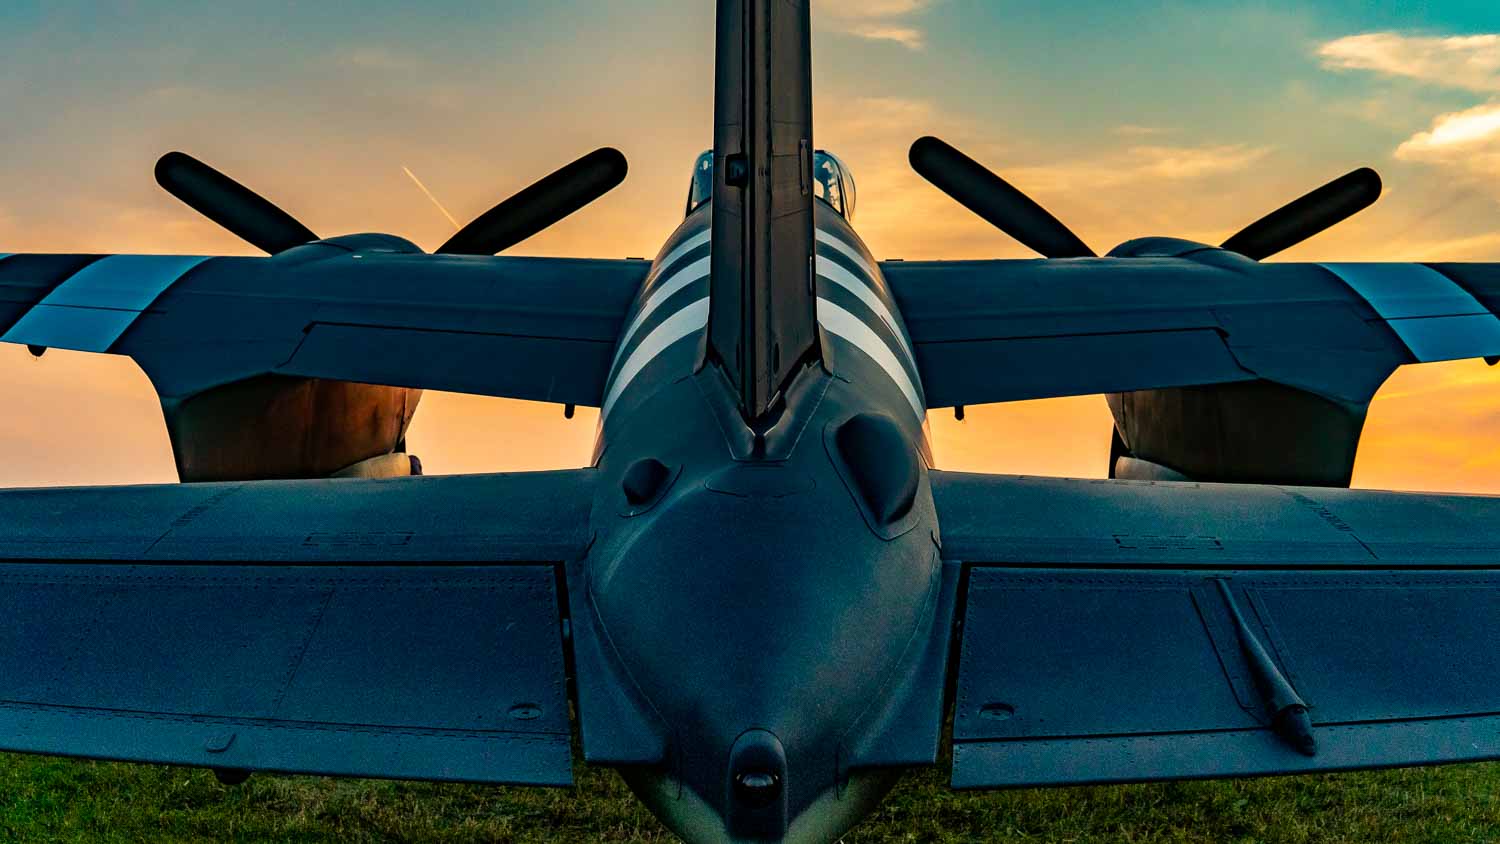 Taken from behind a deHavilland Mosquito. (At the 2019 Oshkosh Airshow.)